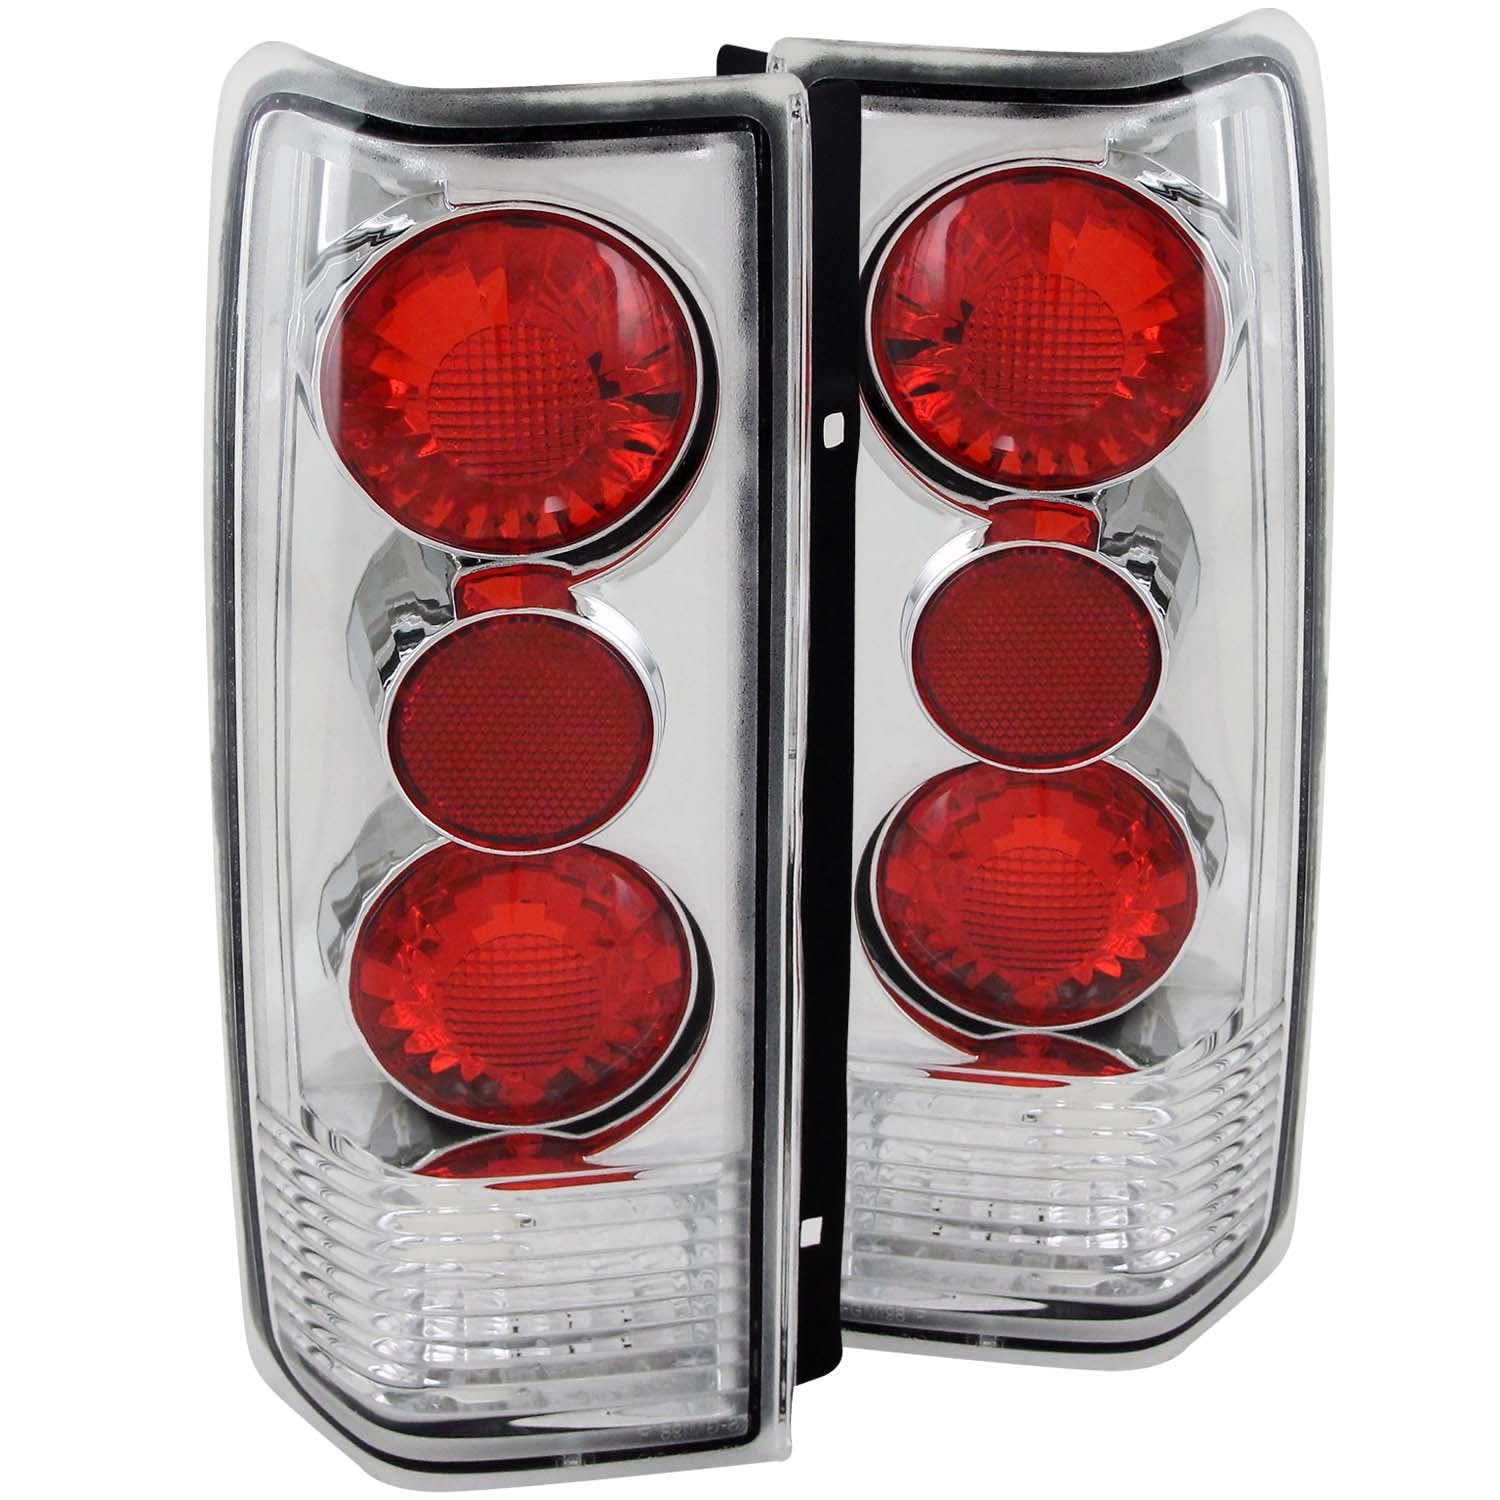 AnzoUSA 211001 Taillights Chrome G2